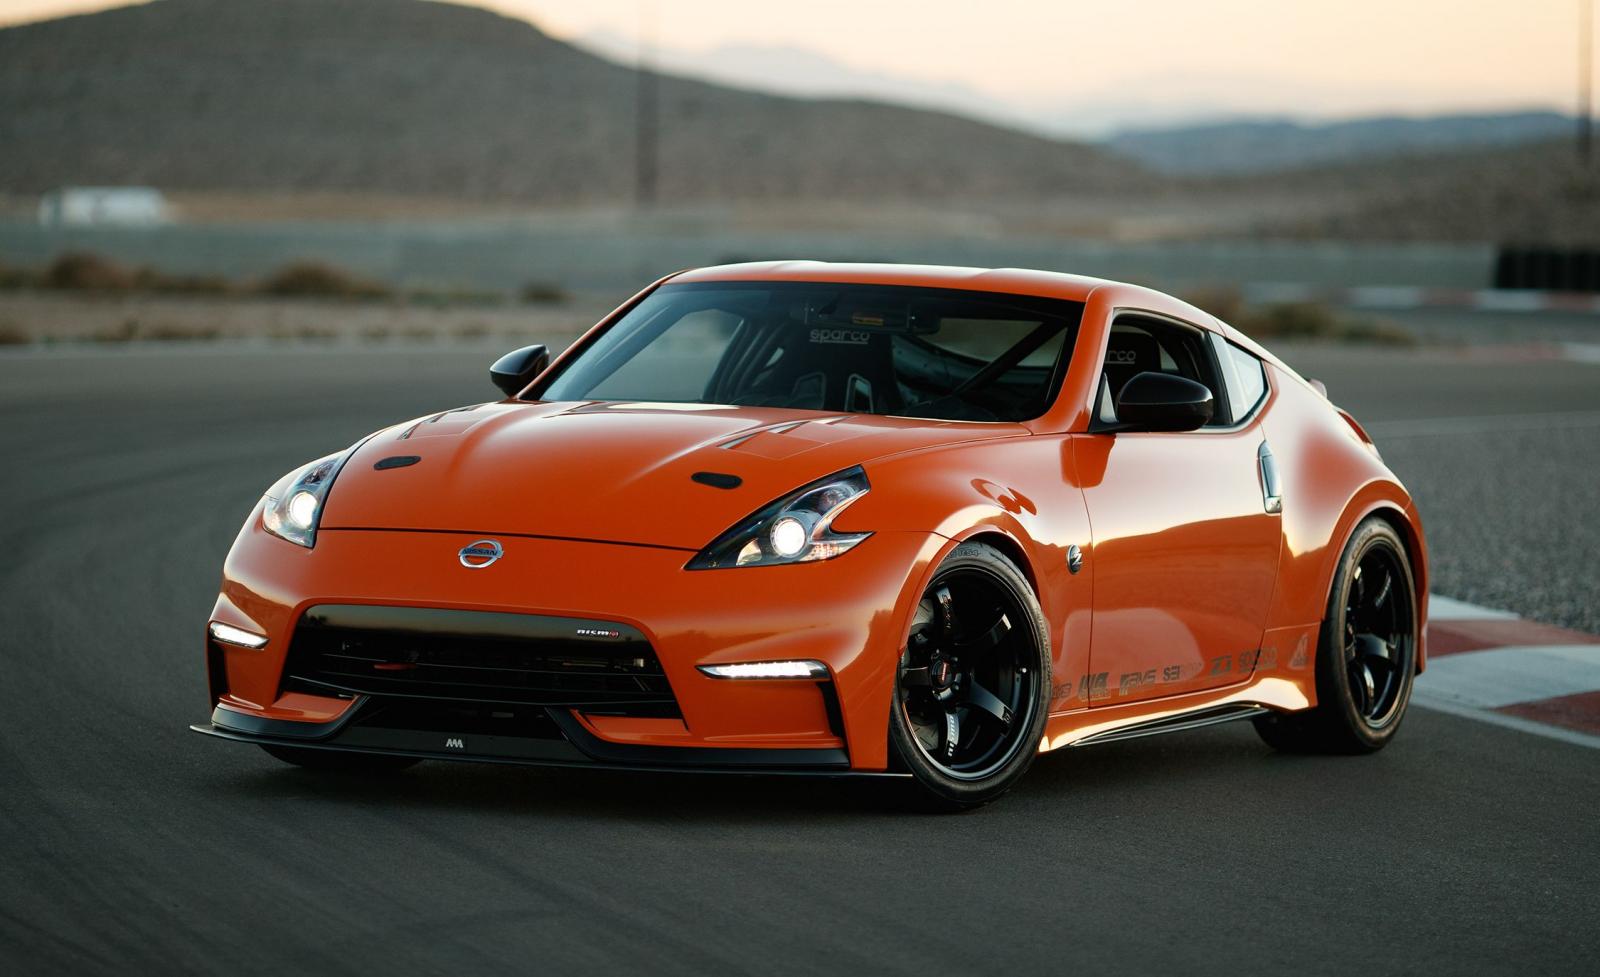 Nissan 370z Review And Specs: Things You Should Know Before Purchasing